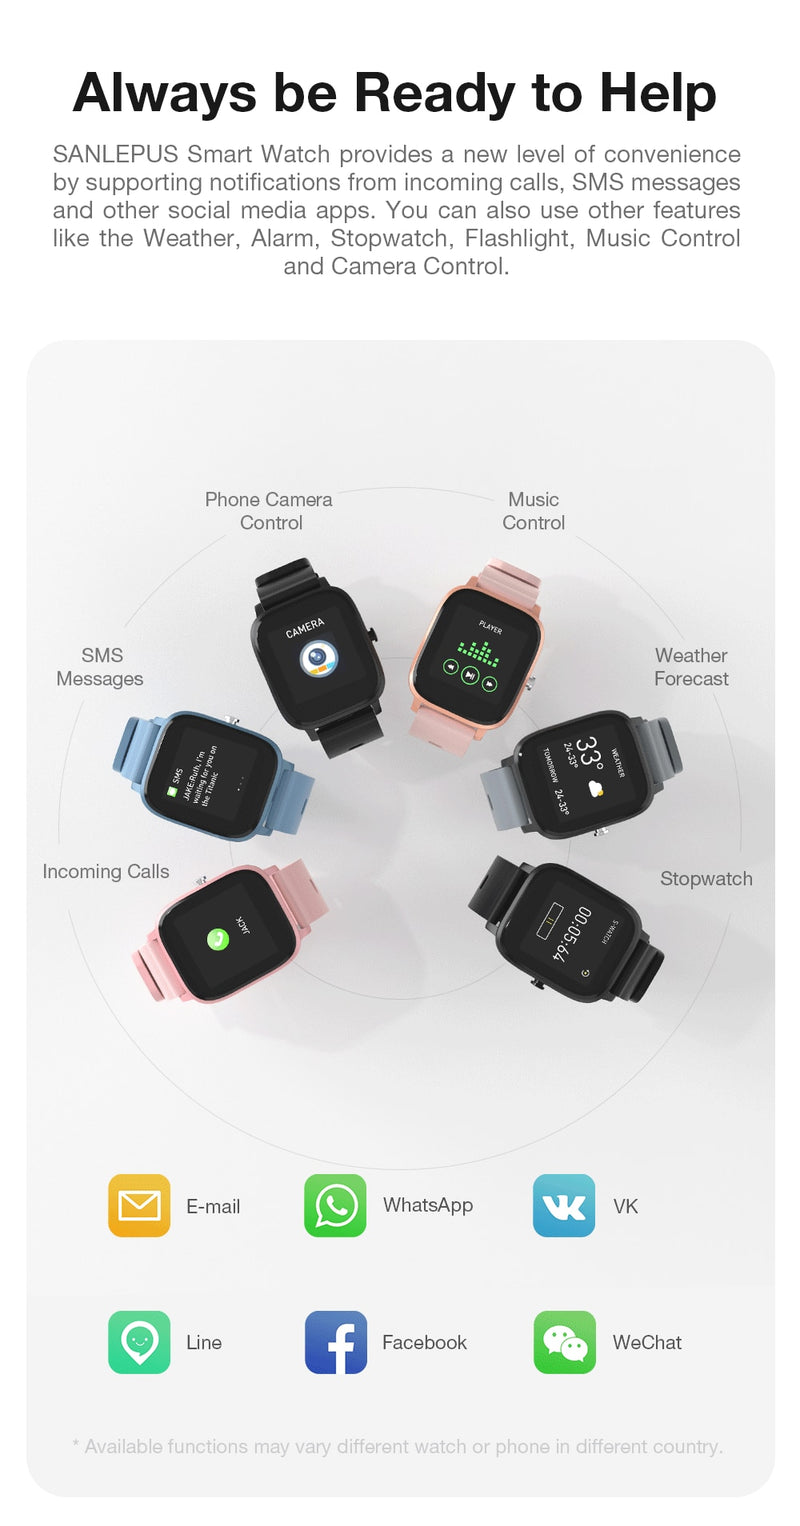 Fitness Smartwatch "Ciro" - Diverse Features - GYMAHOLICS